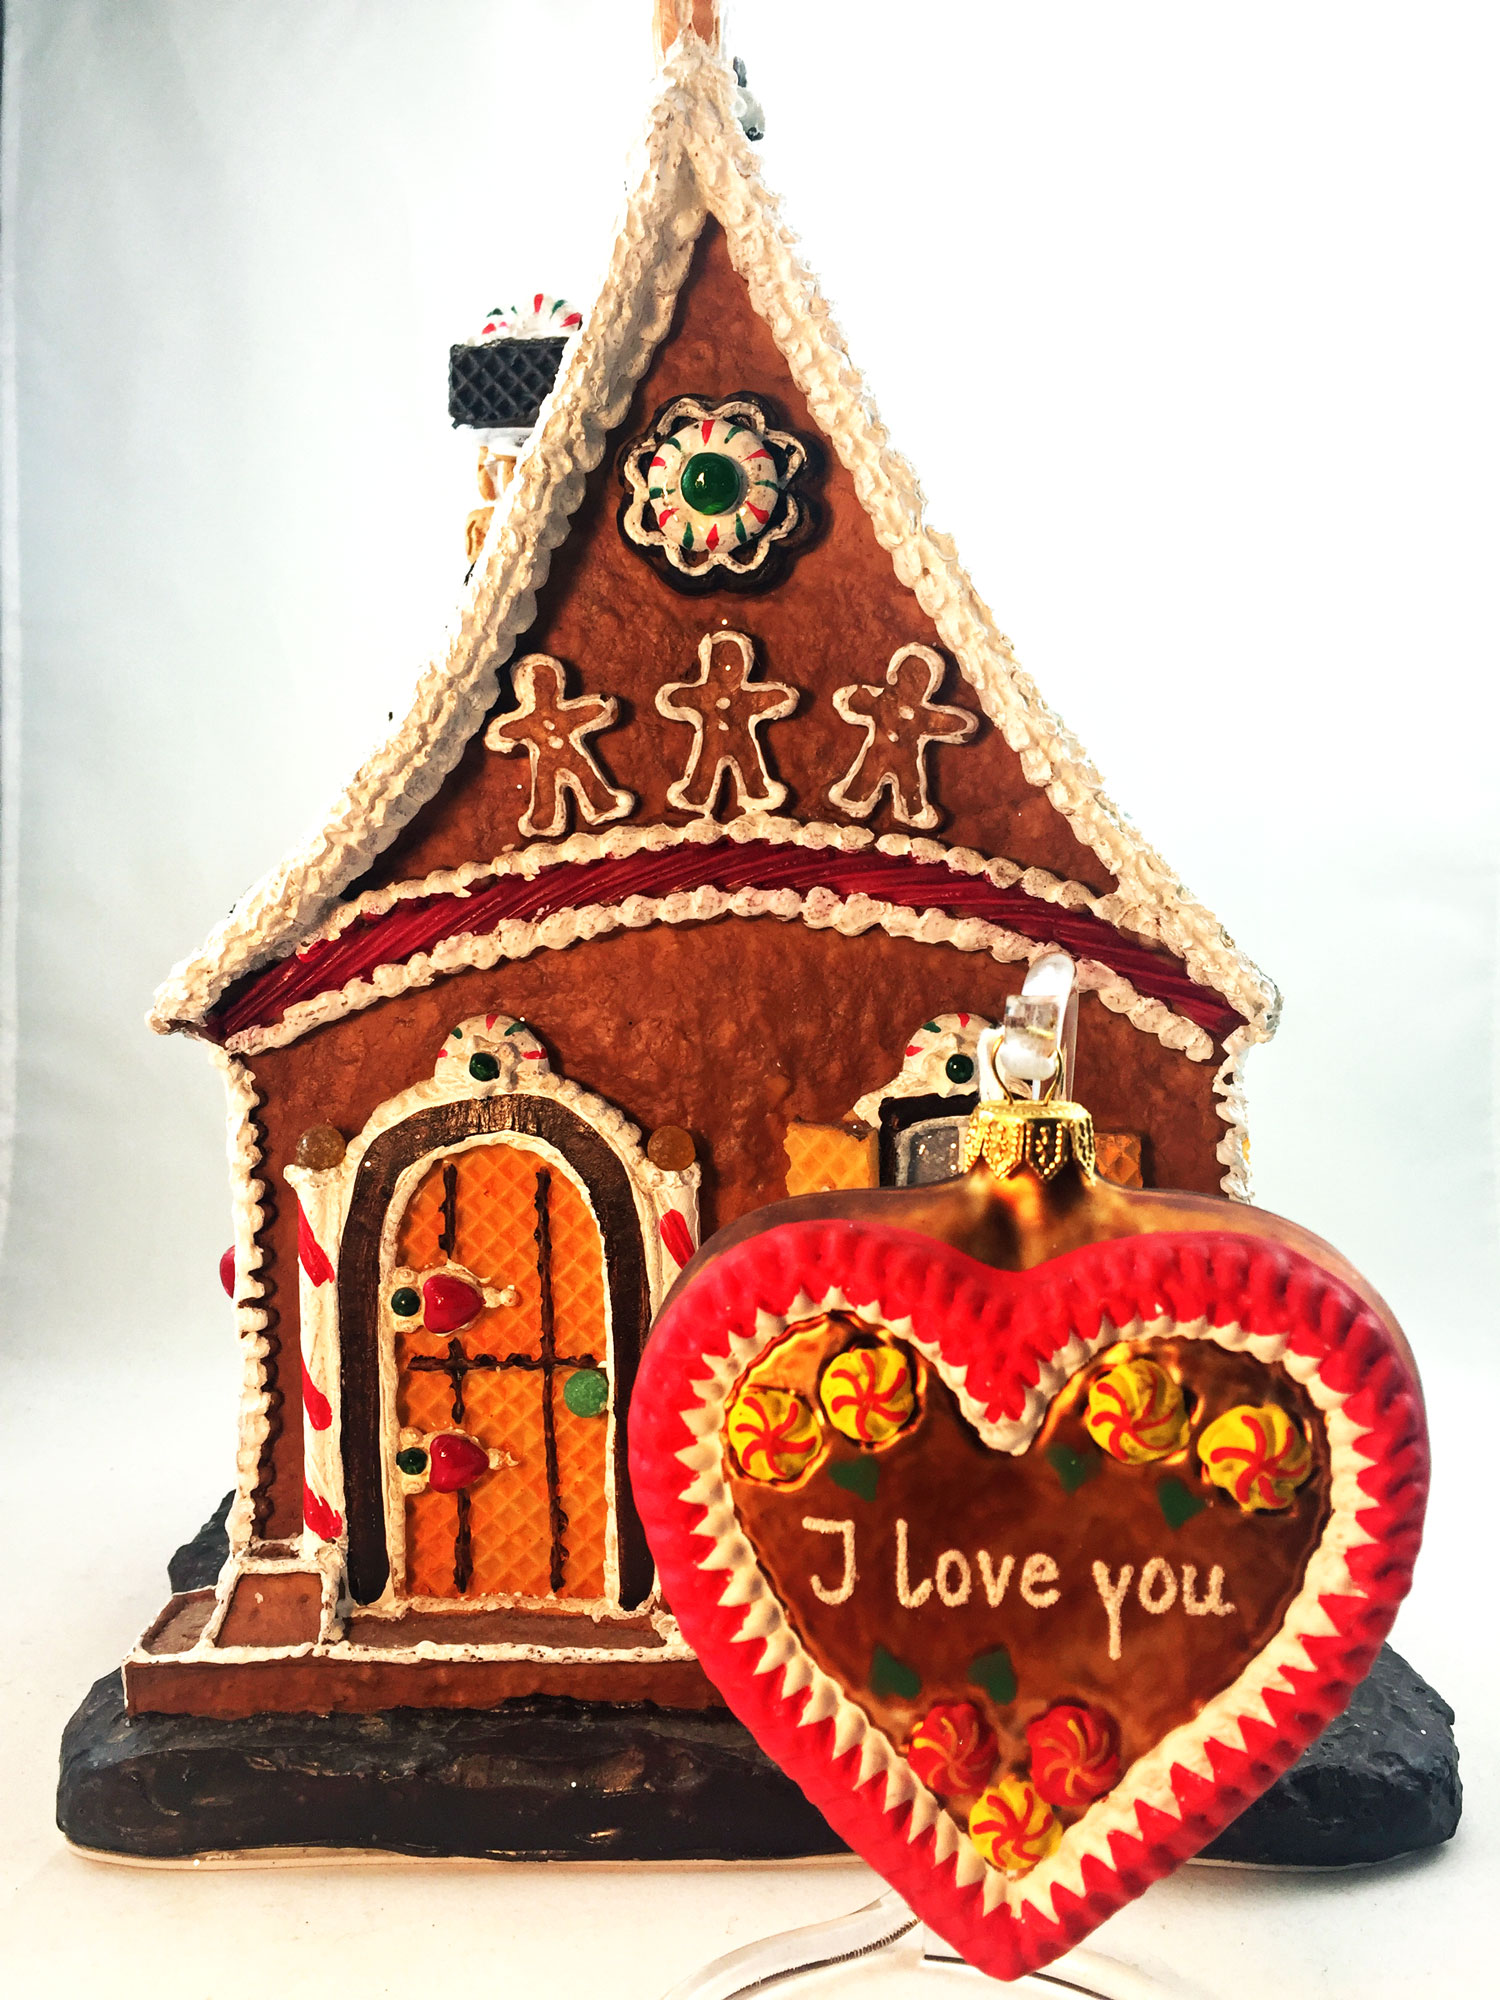 A gingerbread house decoration and a gingerbread cookie ornament that says I love you | OrnamentShop.com